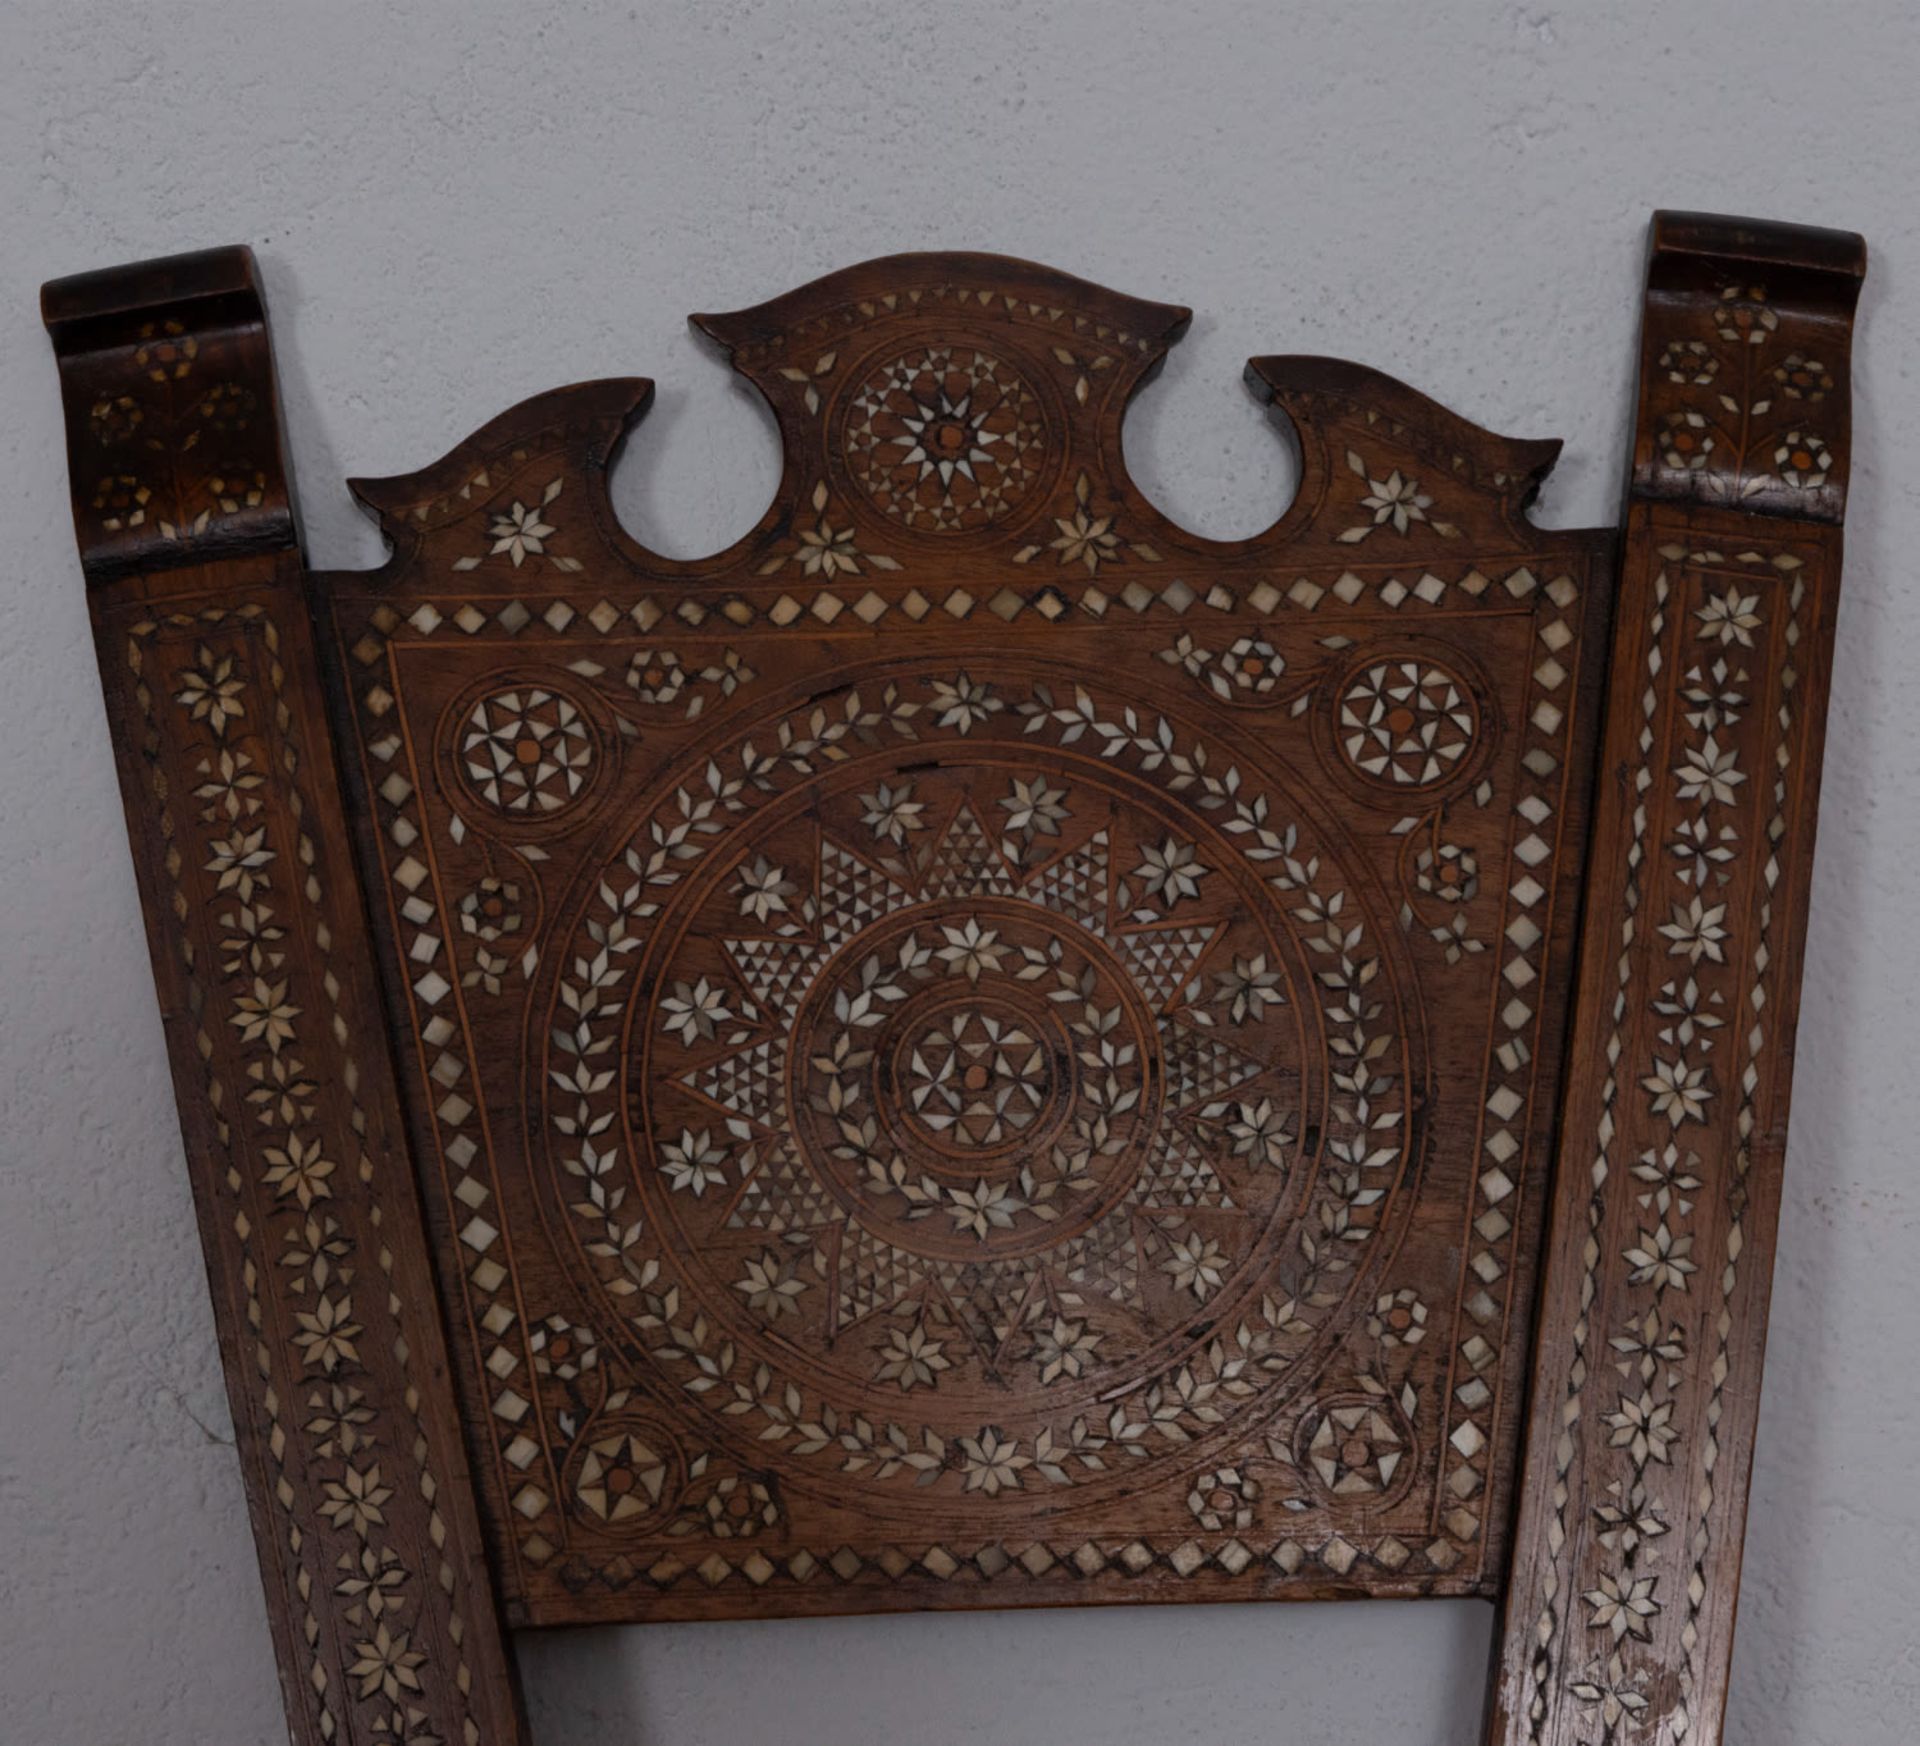 Lot of six chairs with bone inlays with geometric and floral decoration, 19th century - Image 2 of 4